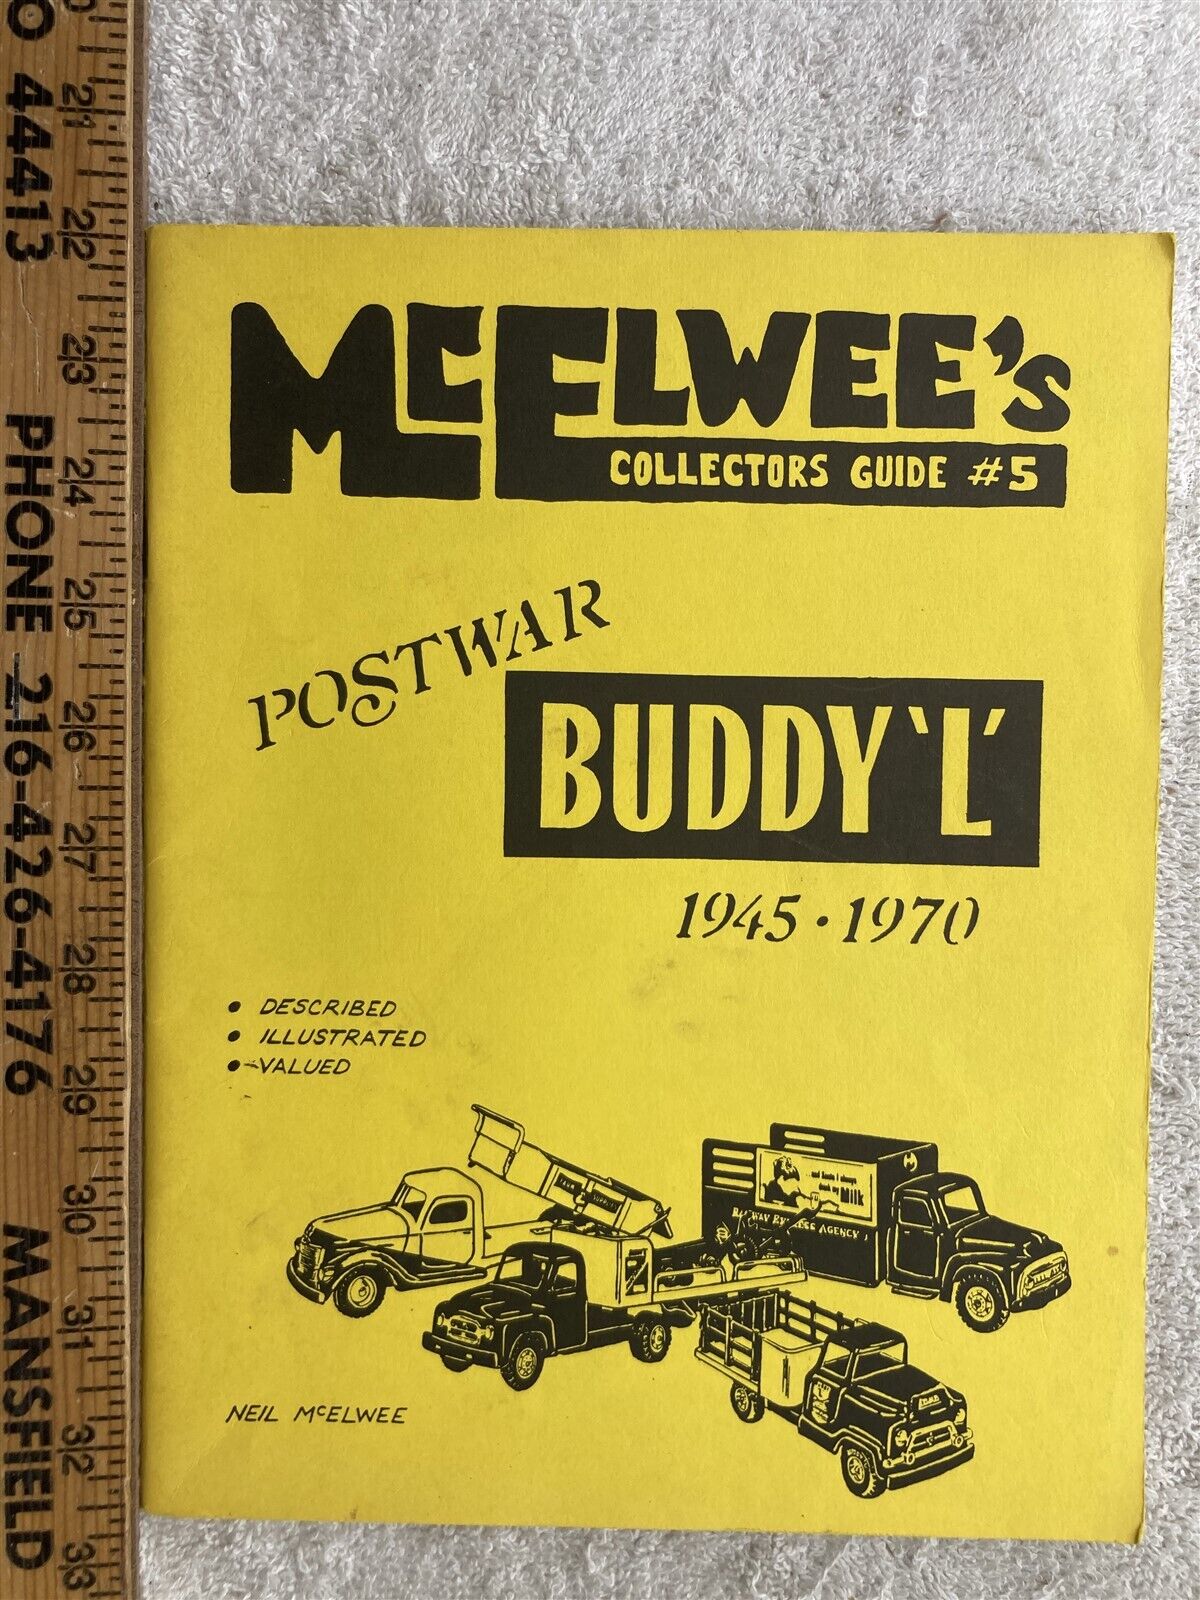 McElwee\'s Collector\'s Guide #5 Postwar Buddy L Pressed Steel Toy Truck 1945-1970